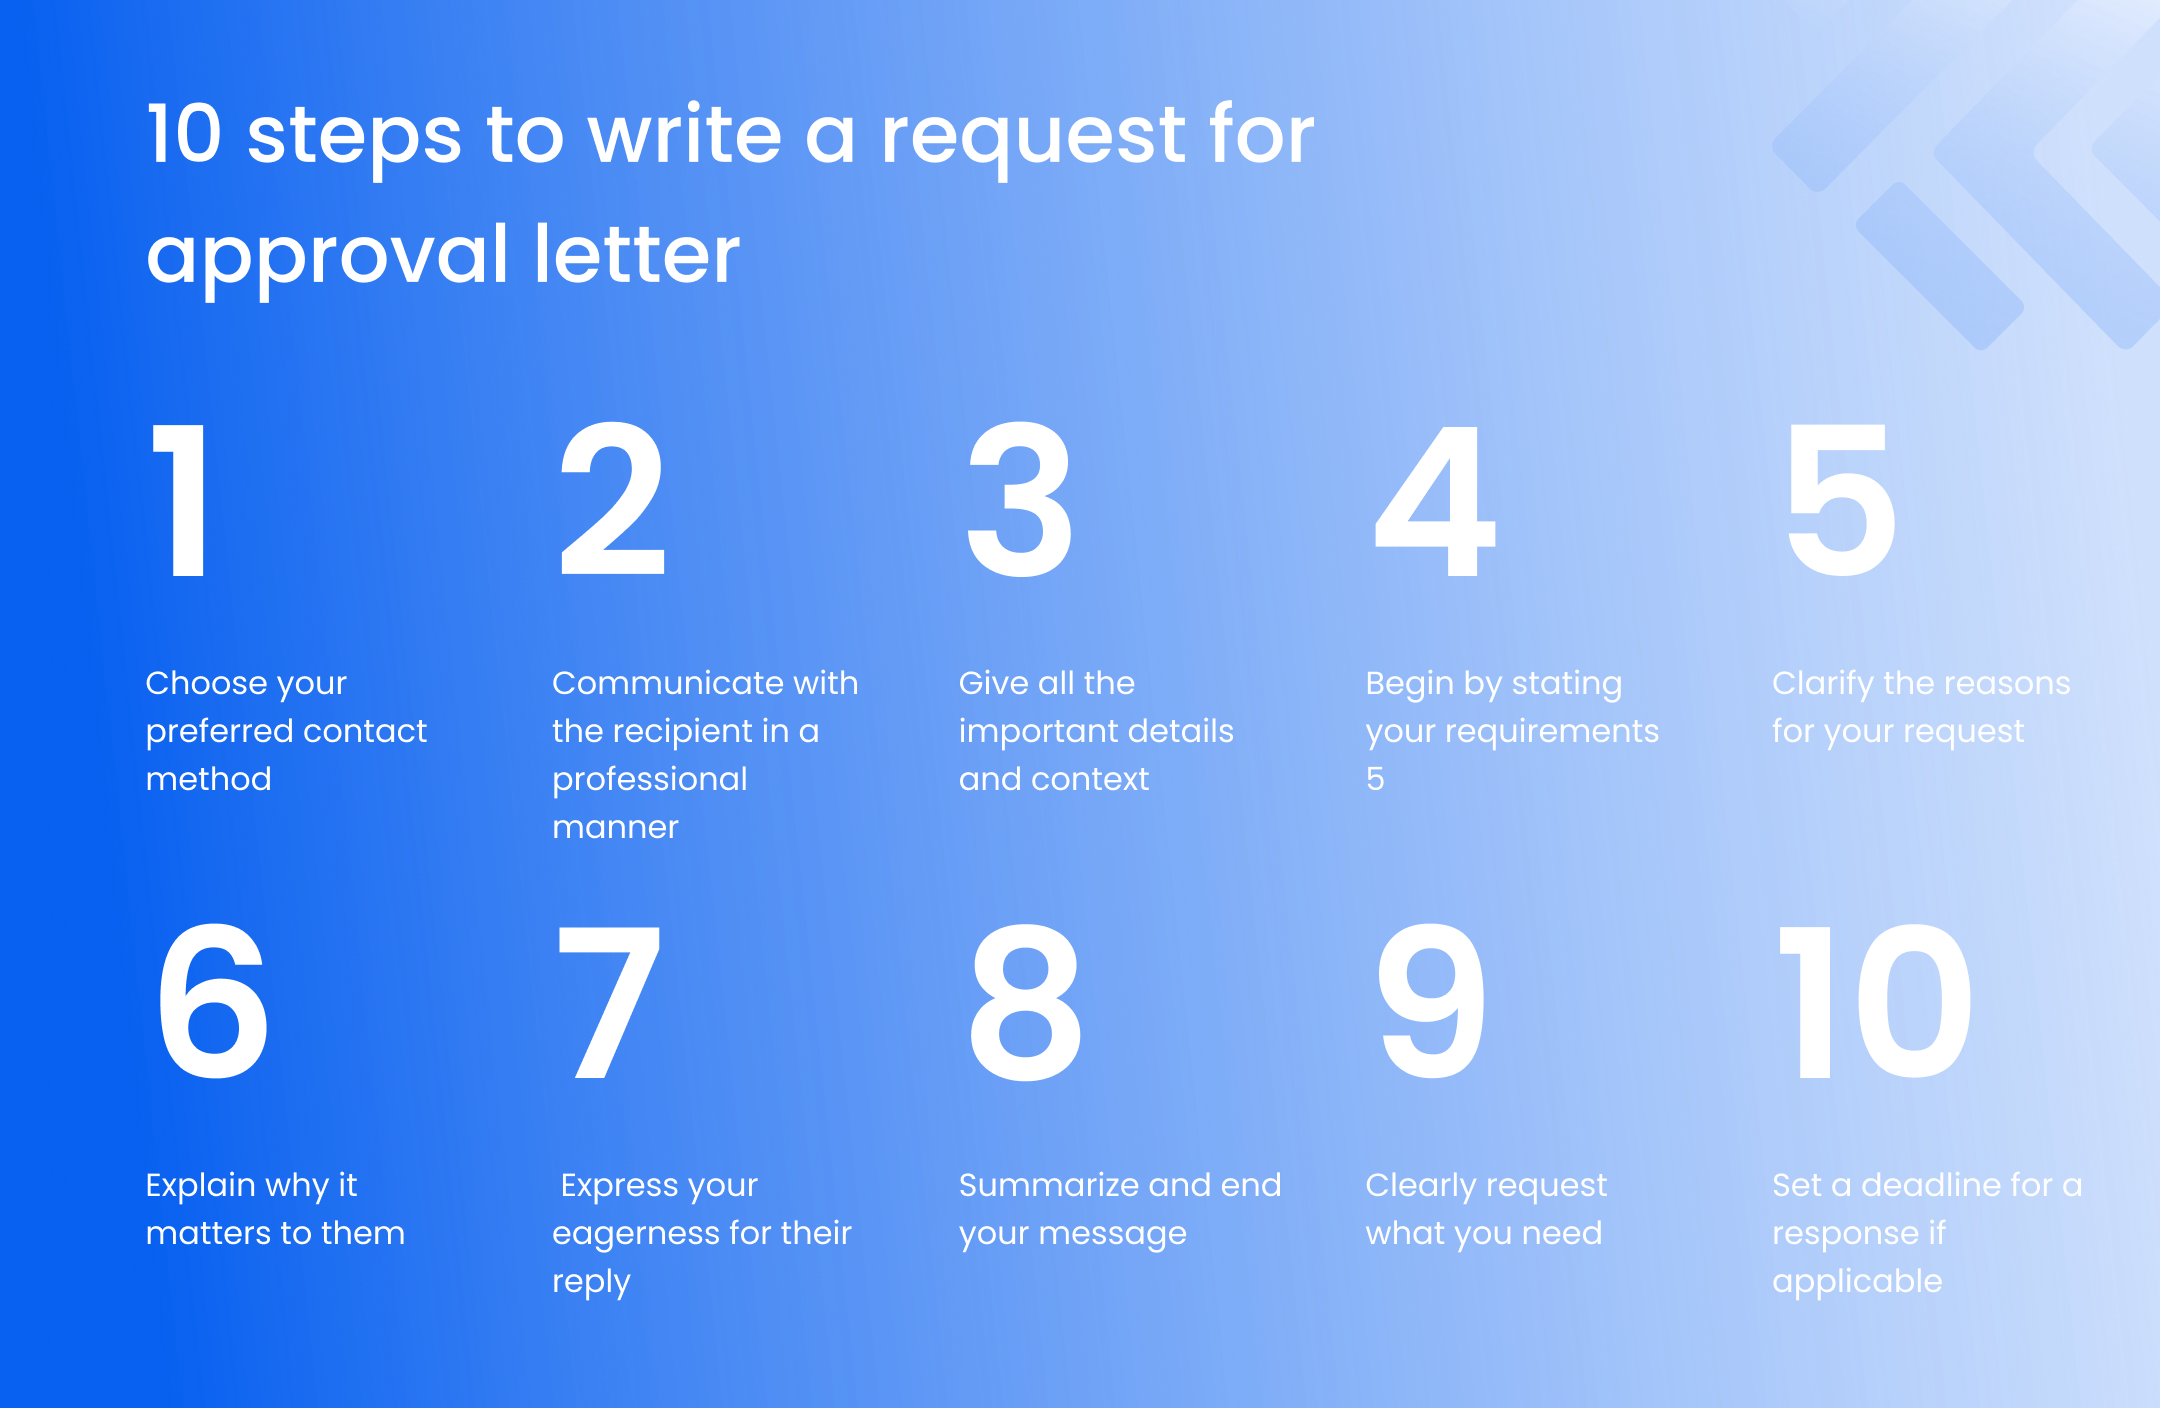 10 steps to write a request for approval letter